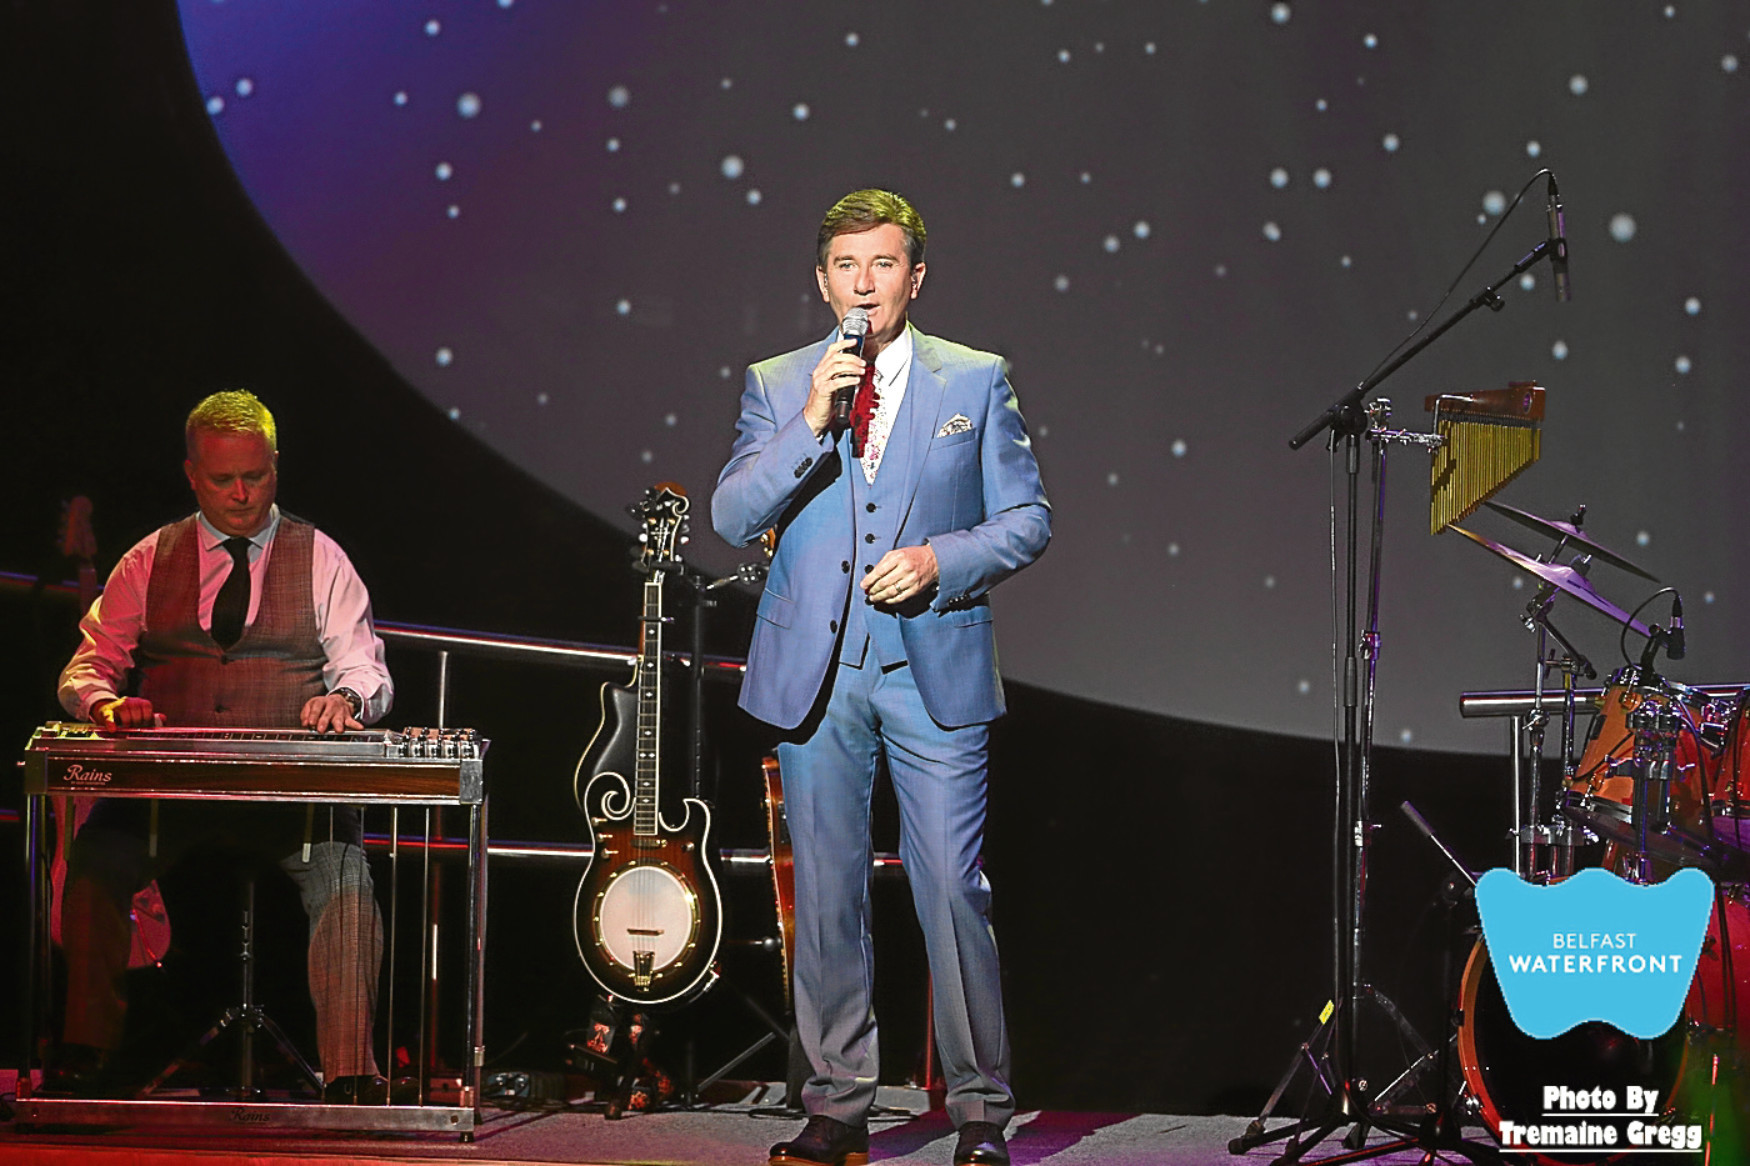 Busy Grandad Daniel O'Donnell hopes this will be the best year yet